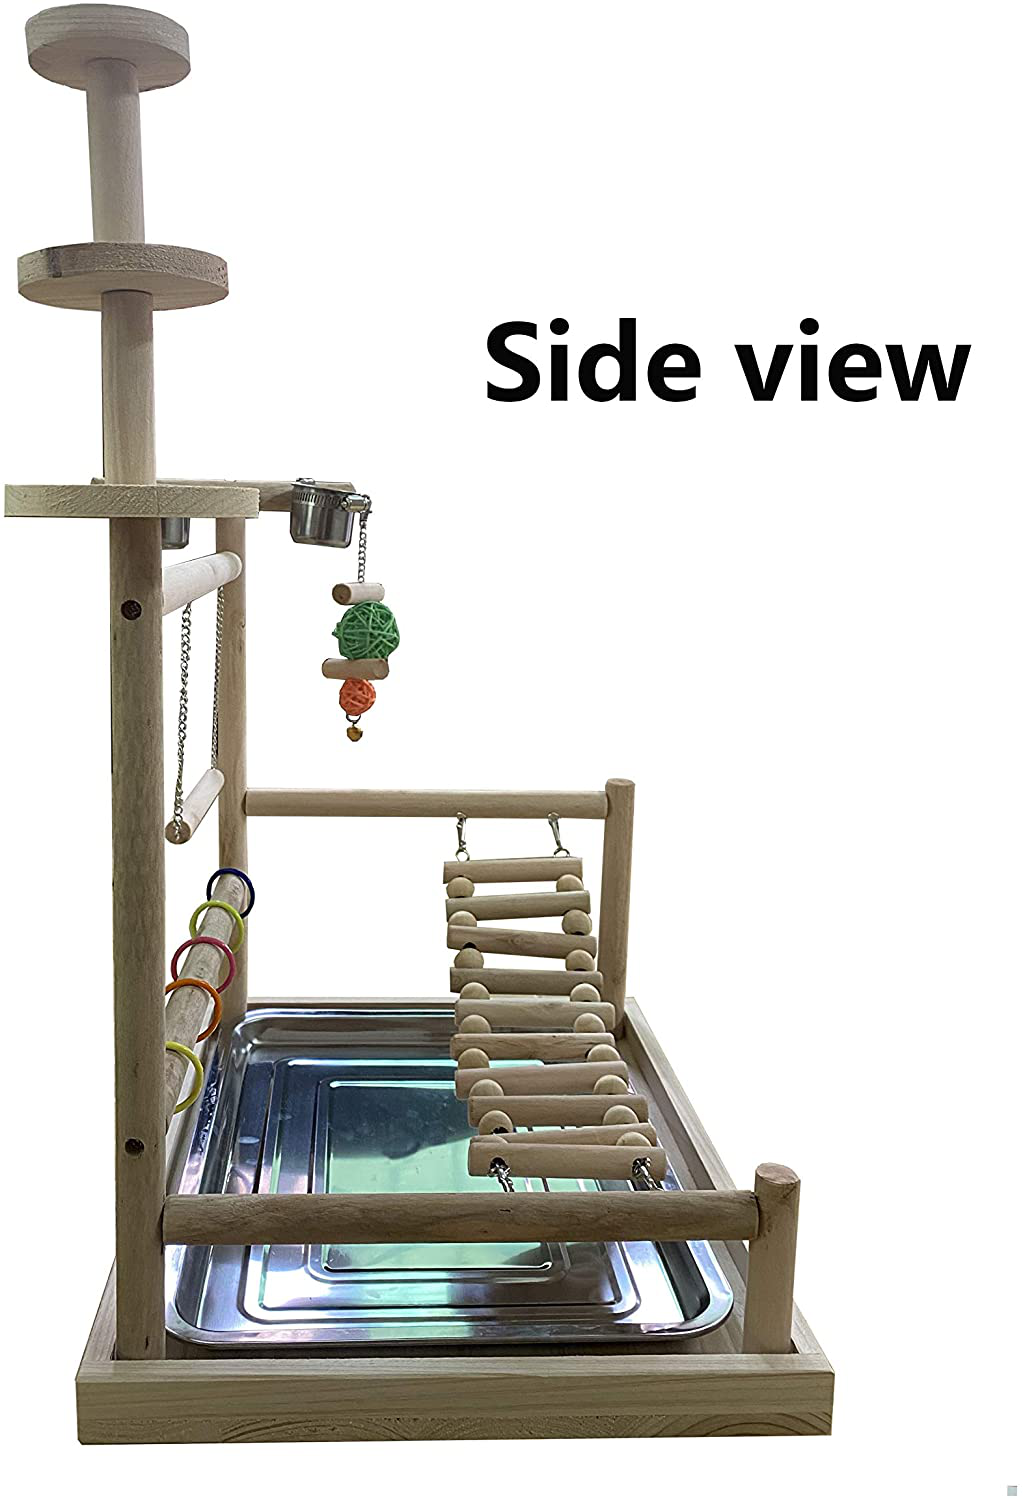 NAPURAL Wyunpets Bird Perch Platform Stand Wood Bird Playground for Small Animals Parrot Parakeet Conure Cockatiel Budgie Gerbil Rat Mouse Chinchilla Hamster Cage Accessories Exercise Toys Sector